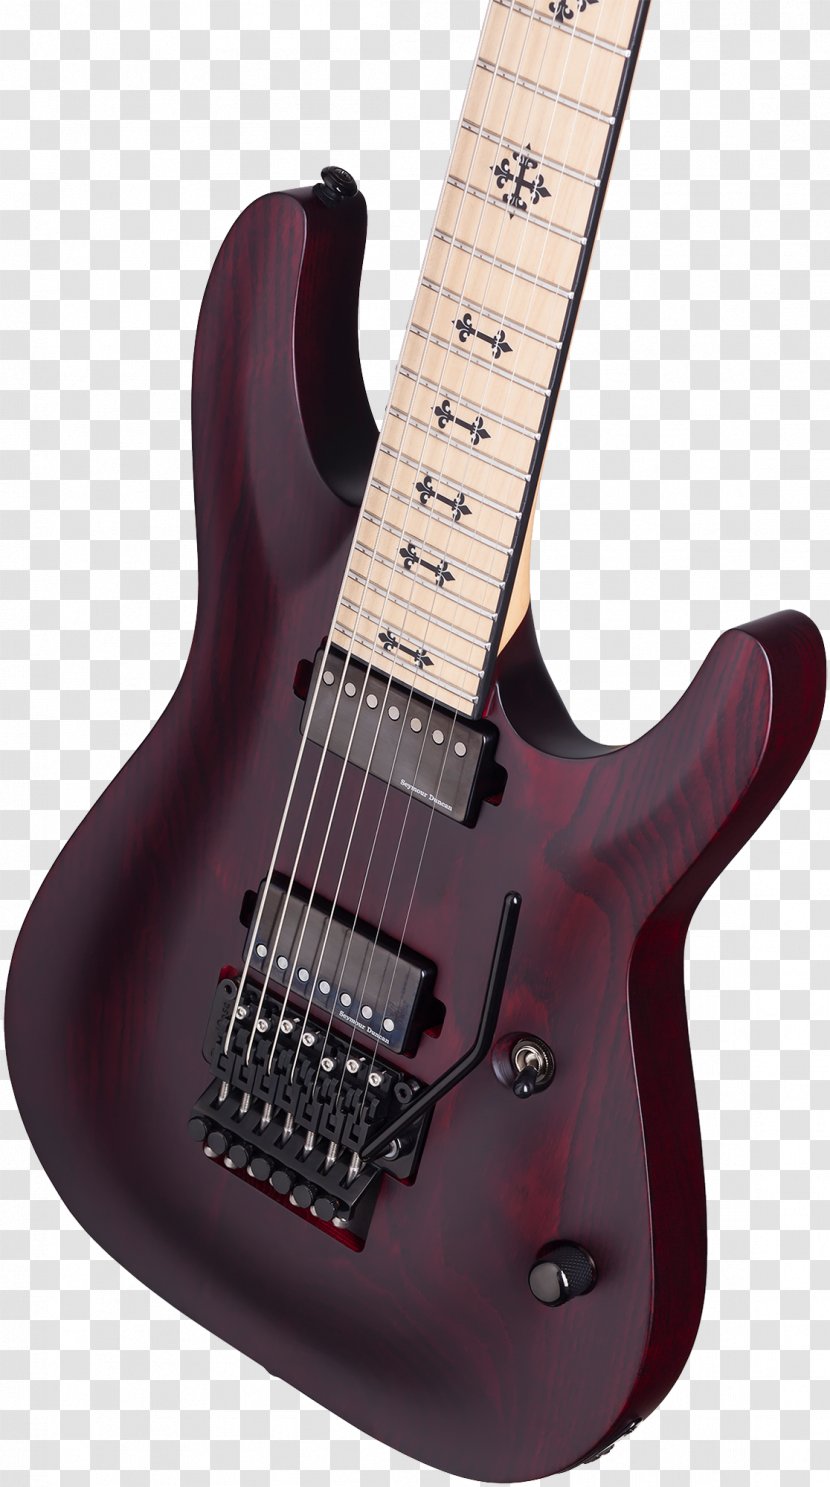 Seven-string Guitar Electric Fingerboard Schecter Research - Nut - Red Satin Transparent PNG